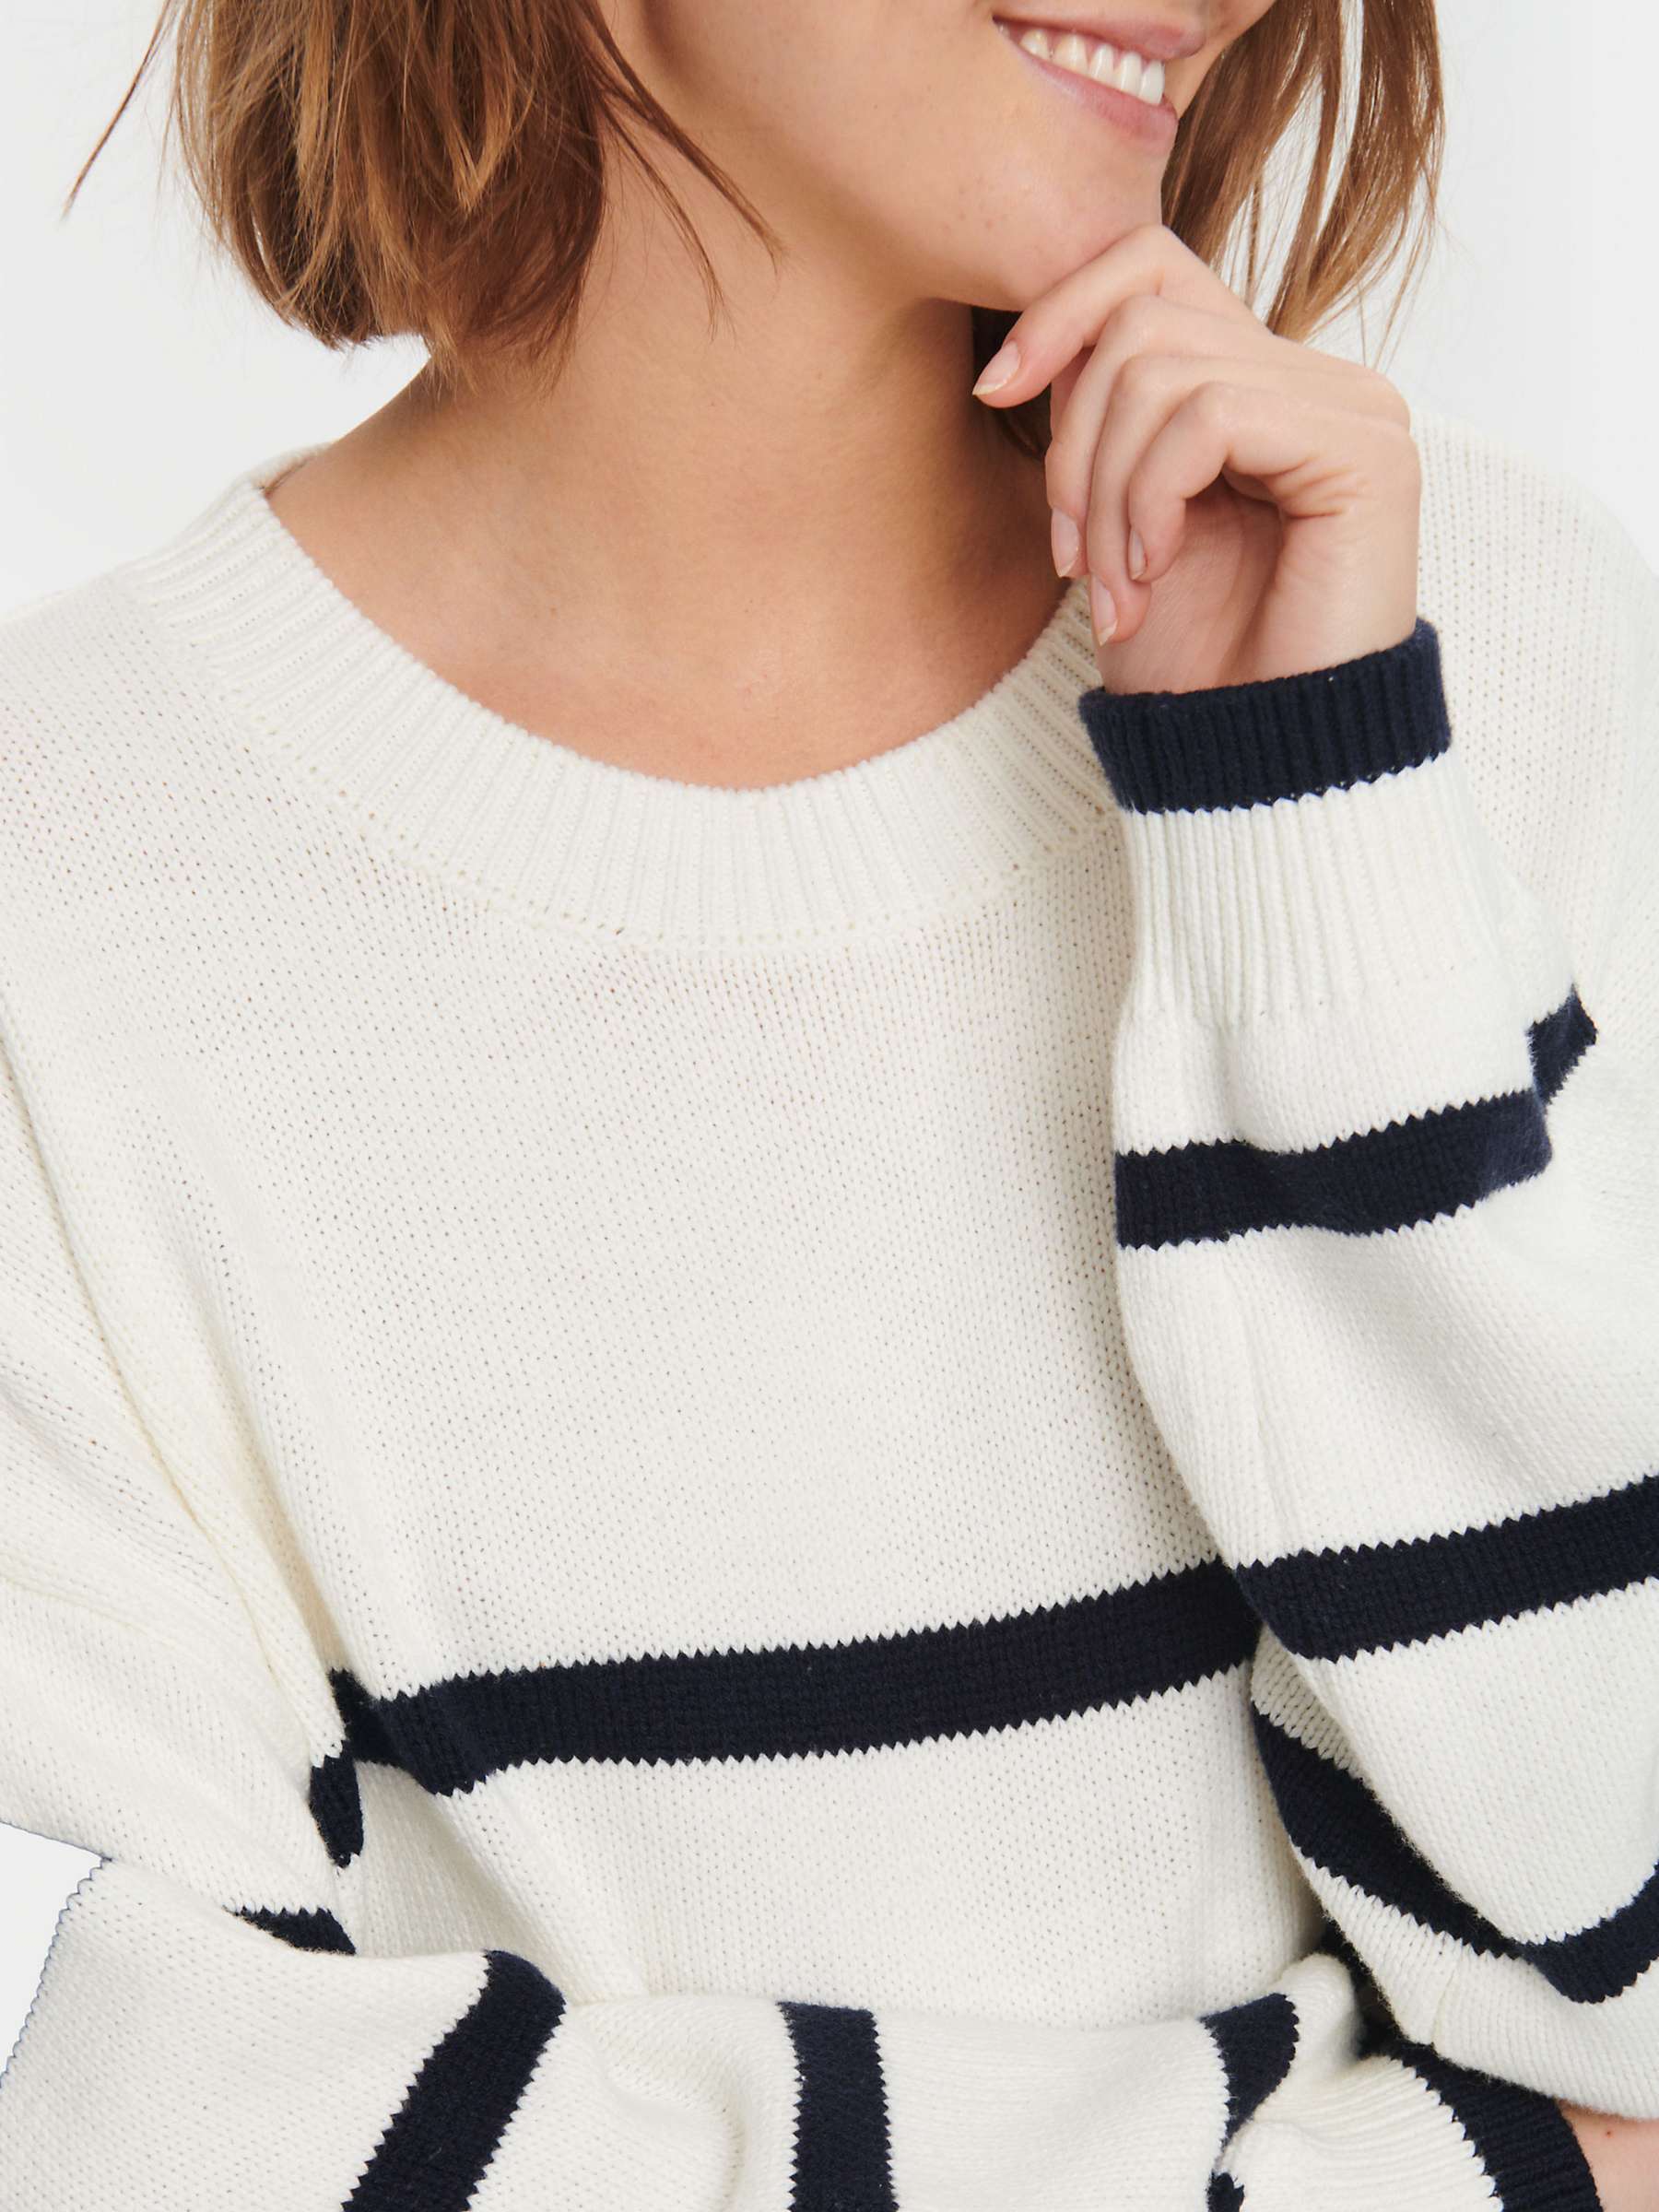 Buy Saint Tropez Terna Relaxed Striped Jumper Online at johnlewis.com